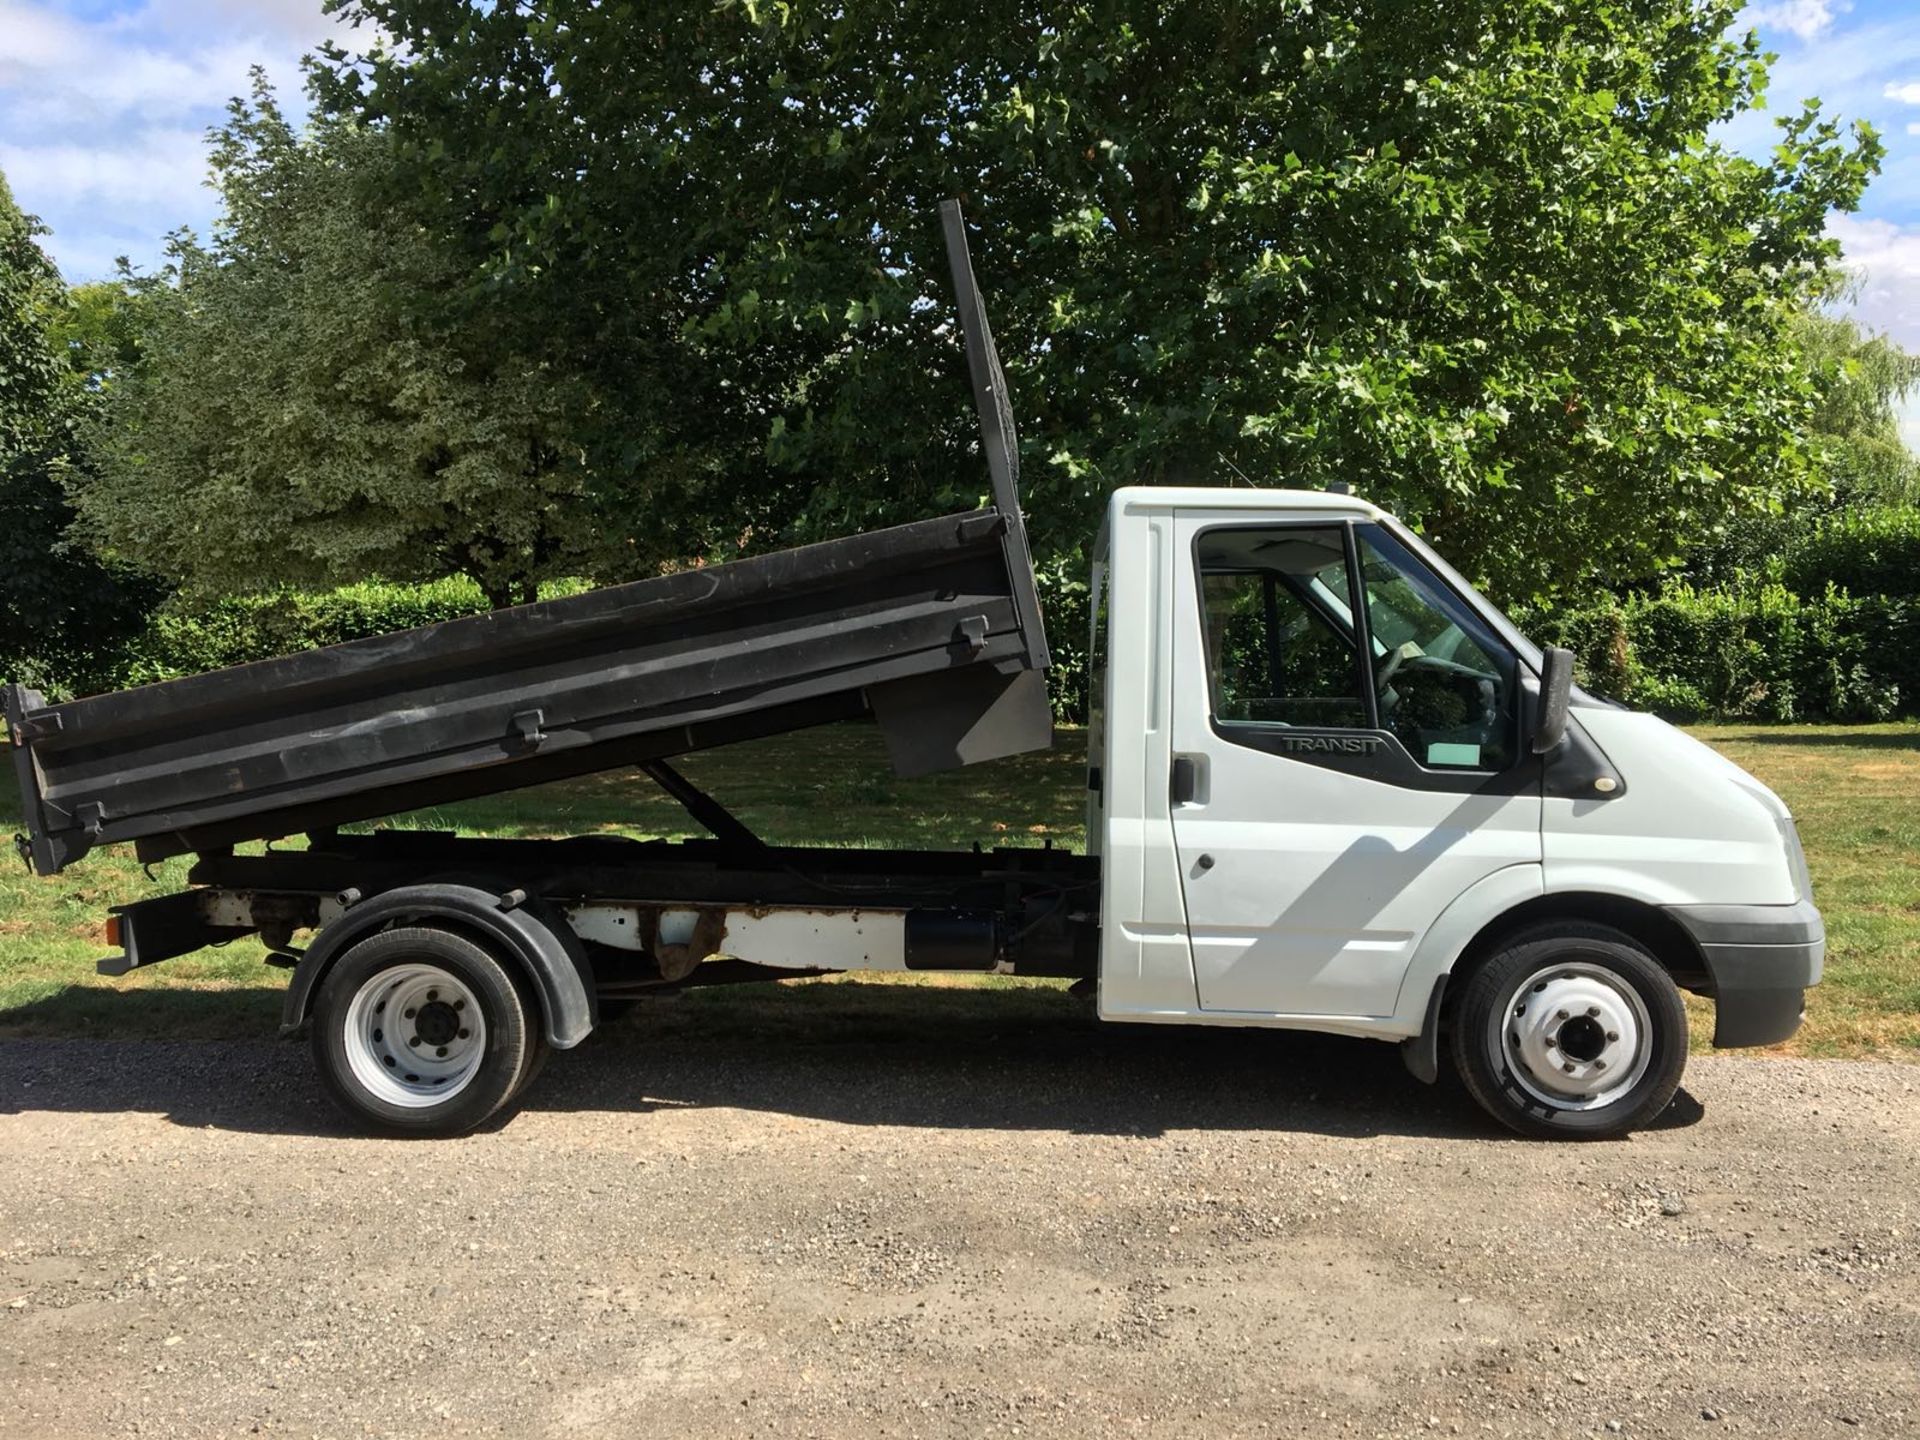 2008/58 REG FORD TRANSIT 100 T350M RWD WHITE DIESEL TIPPER, SHOWING 0 FORMER KEEPERS *NO VAT* - Image 7 of 7